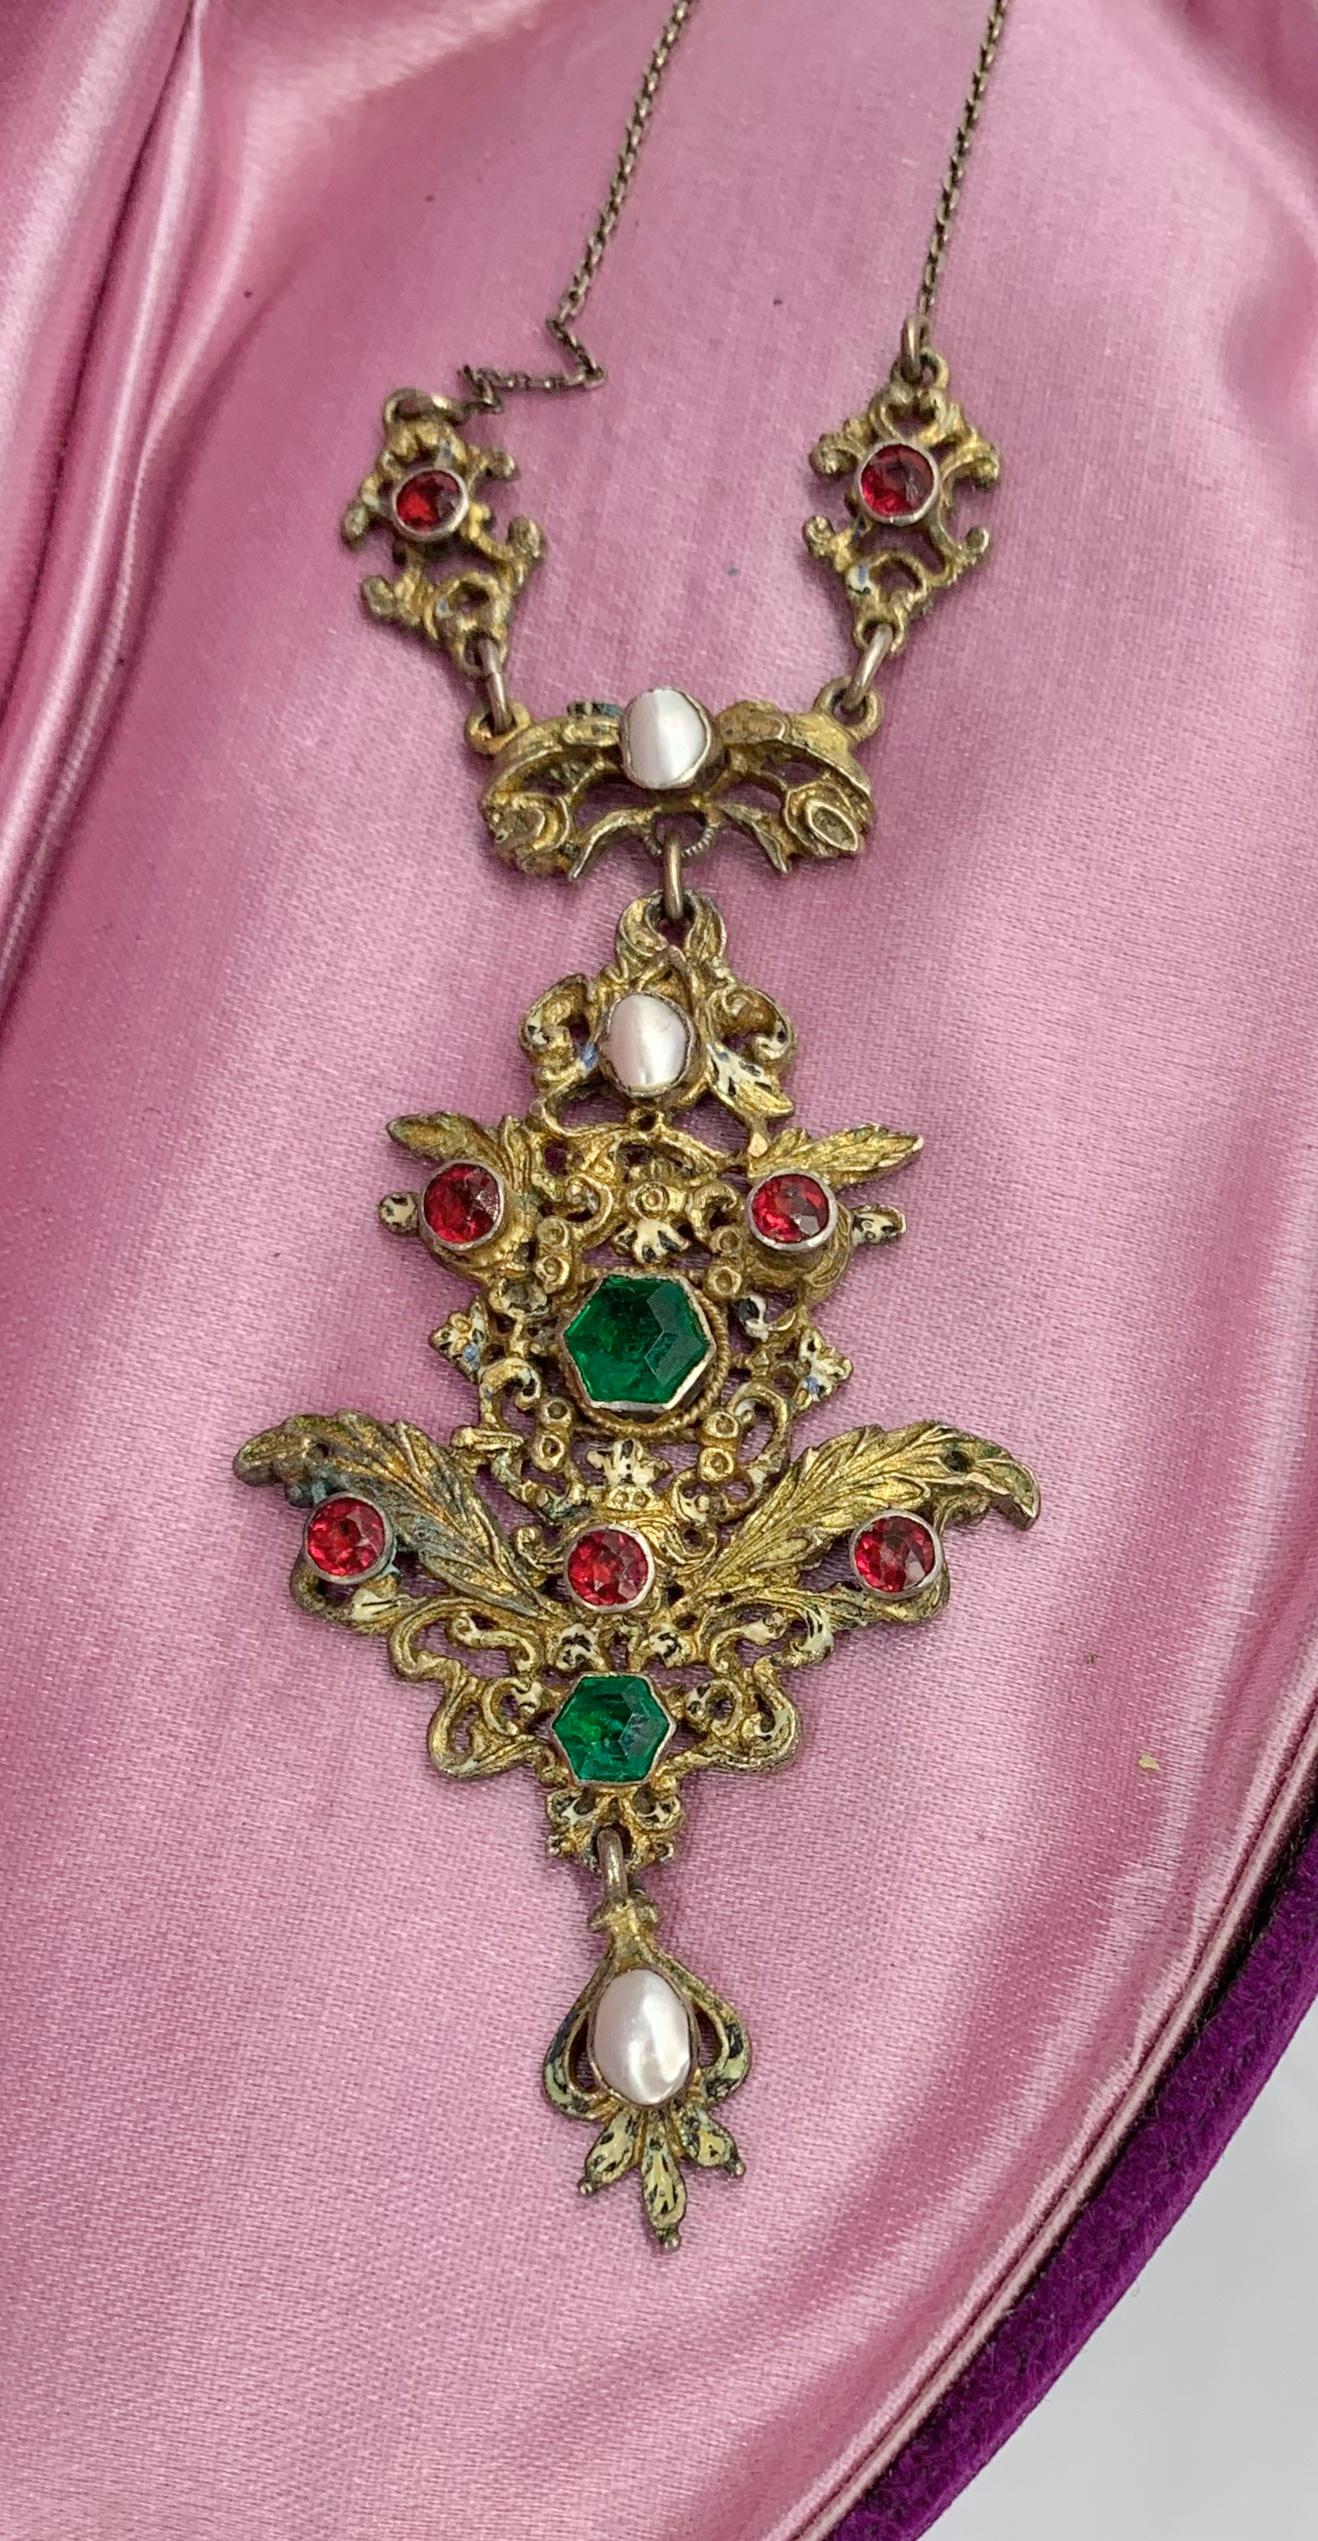 This is a magnificent piece of Austro-Hungarian Emerald Ruby and Pearl jewelry.  It is in the Renaissance Revival style and dates to circa 1870.  The gems are all set in silver gilt as was the custom of the Austro-Hungarian jewels.  The piece has